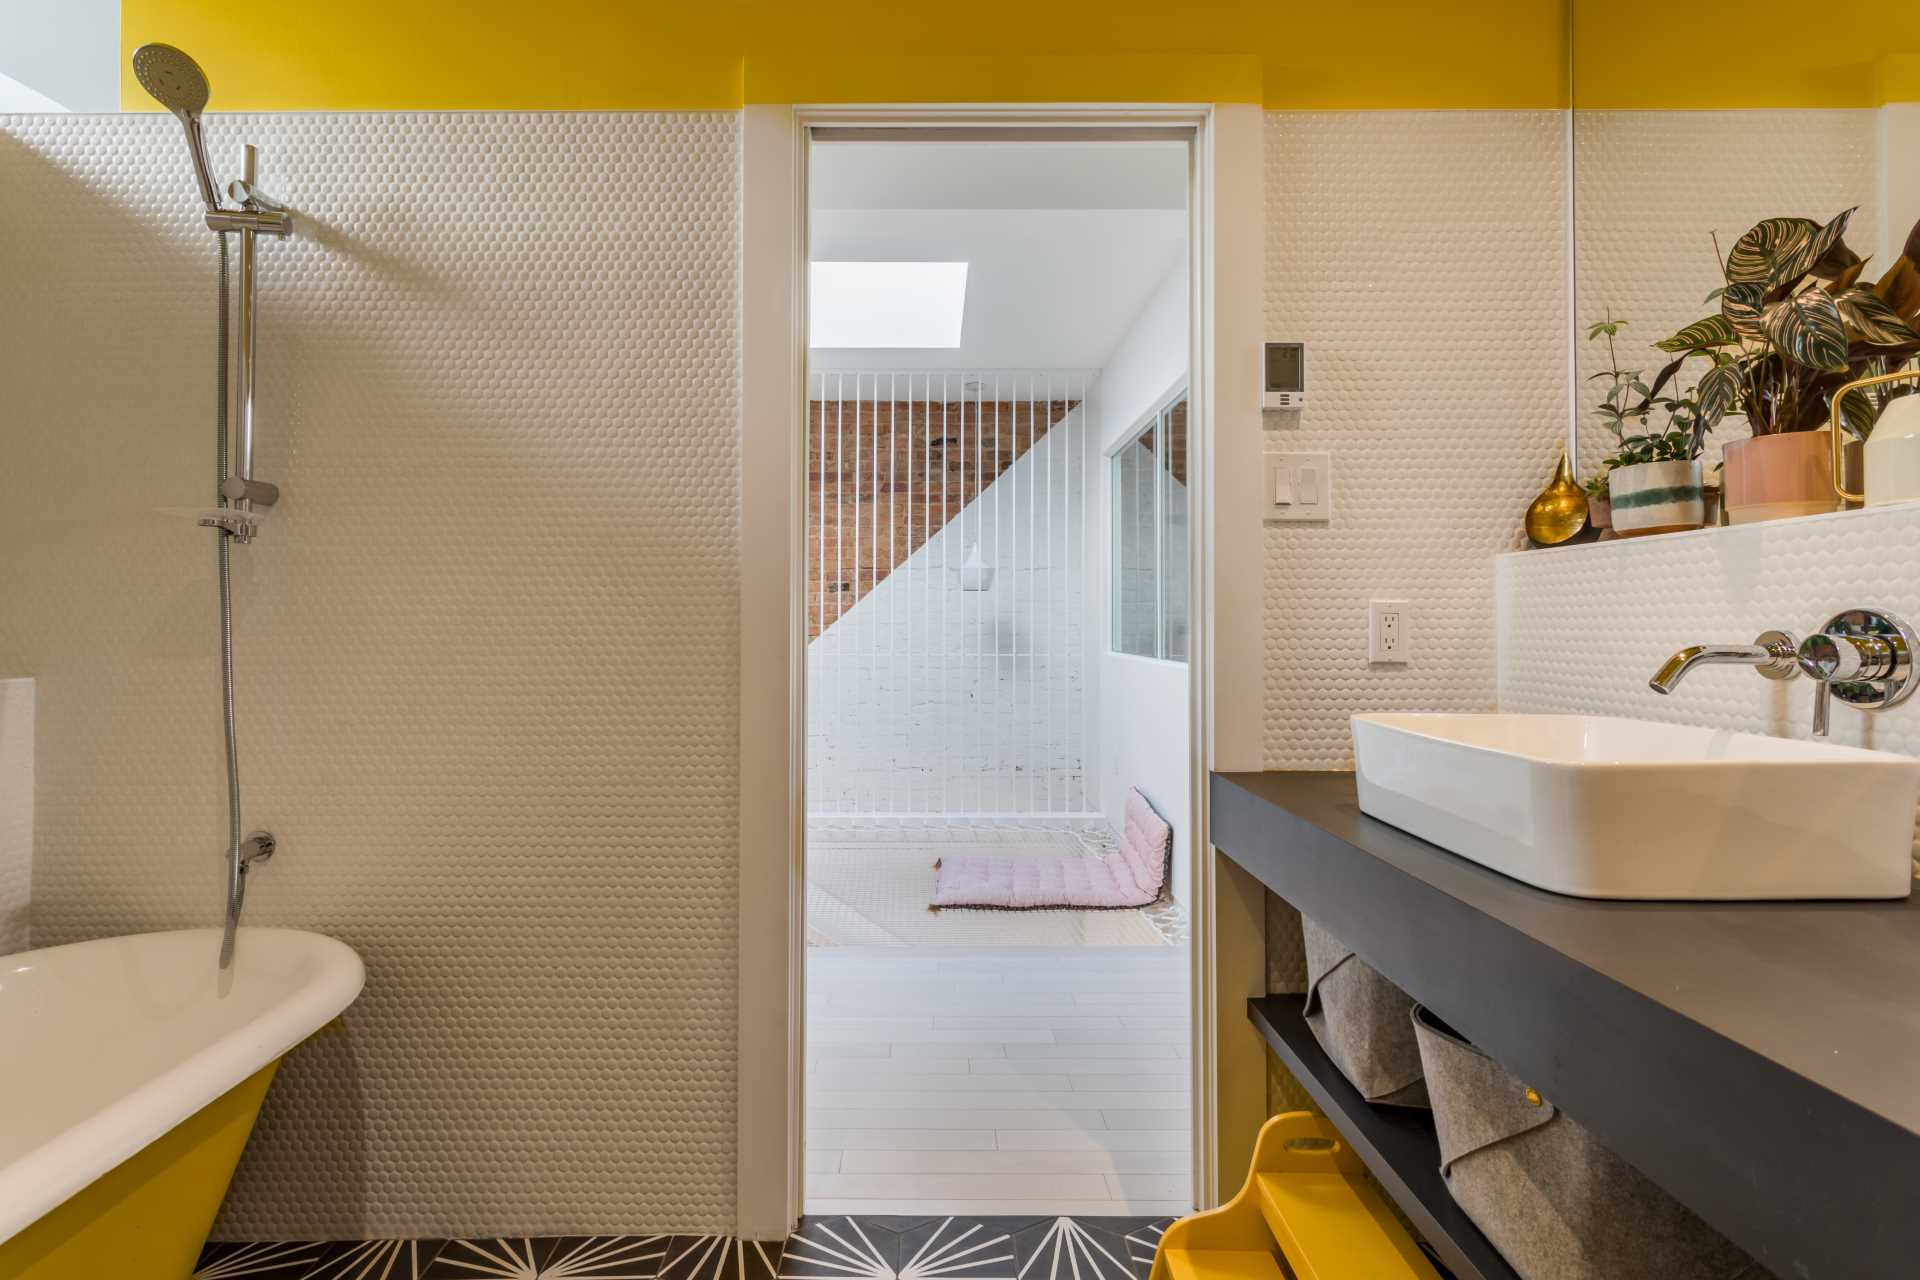 Yellow and white have been chosen for the color palette of this modern bathroom, while black and white tiles cover the floor.